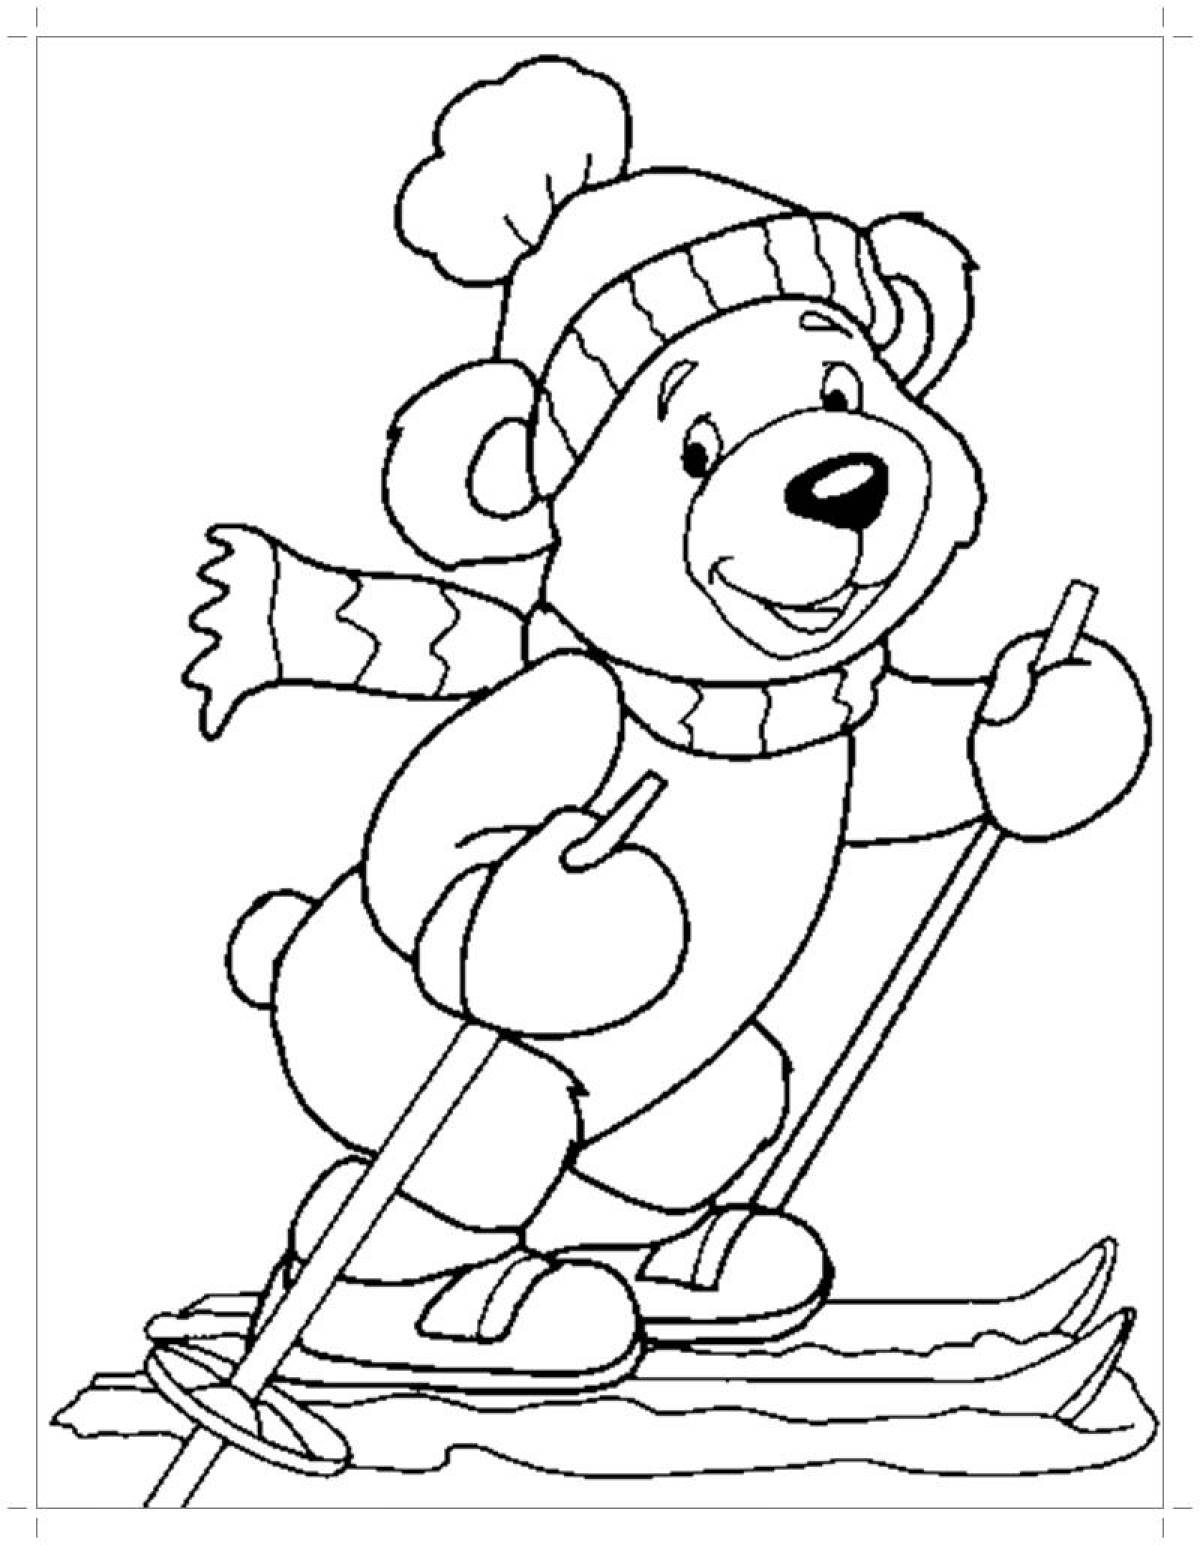 Glowing coloring book for children 3-4 years old winter sports